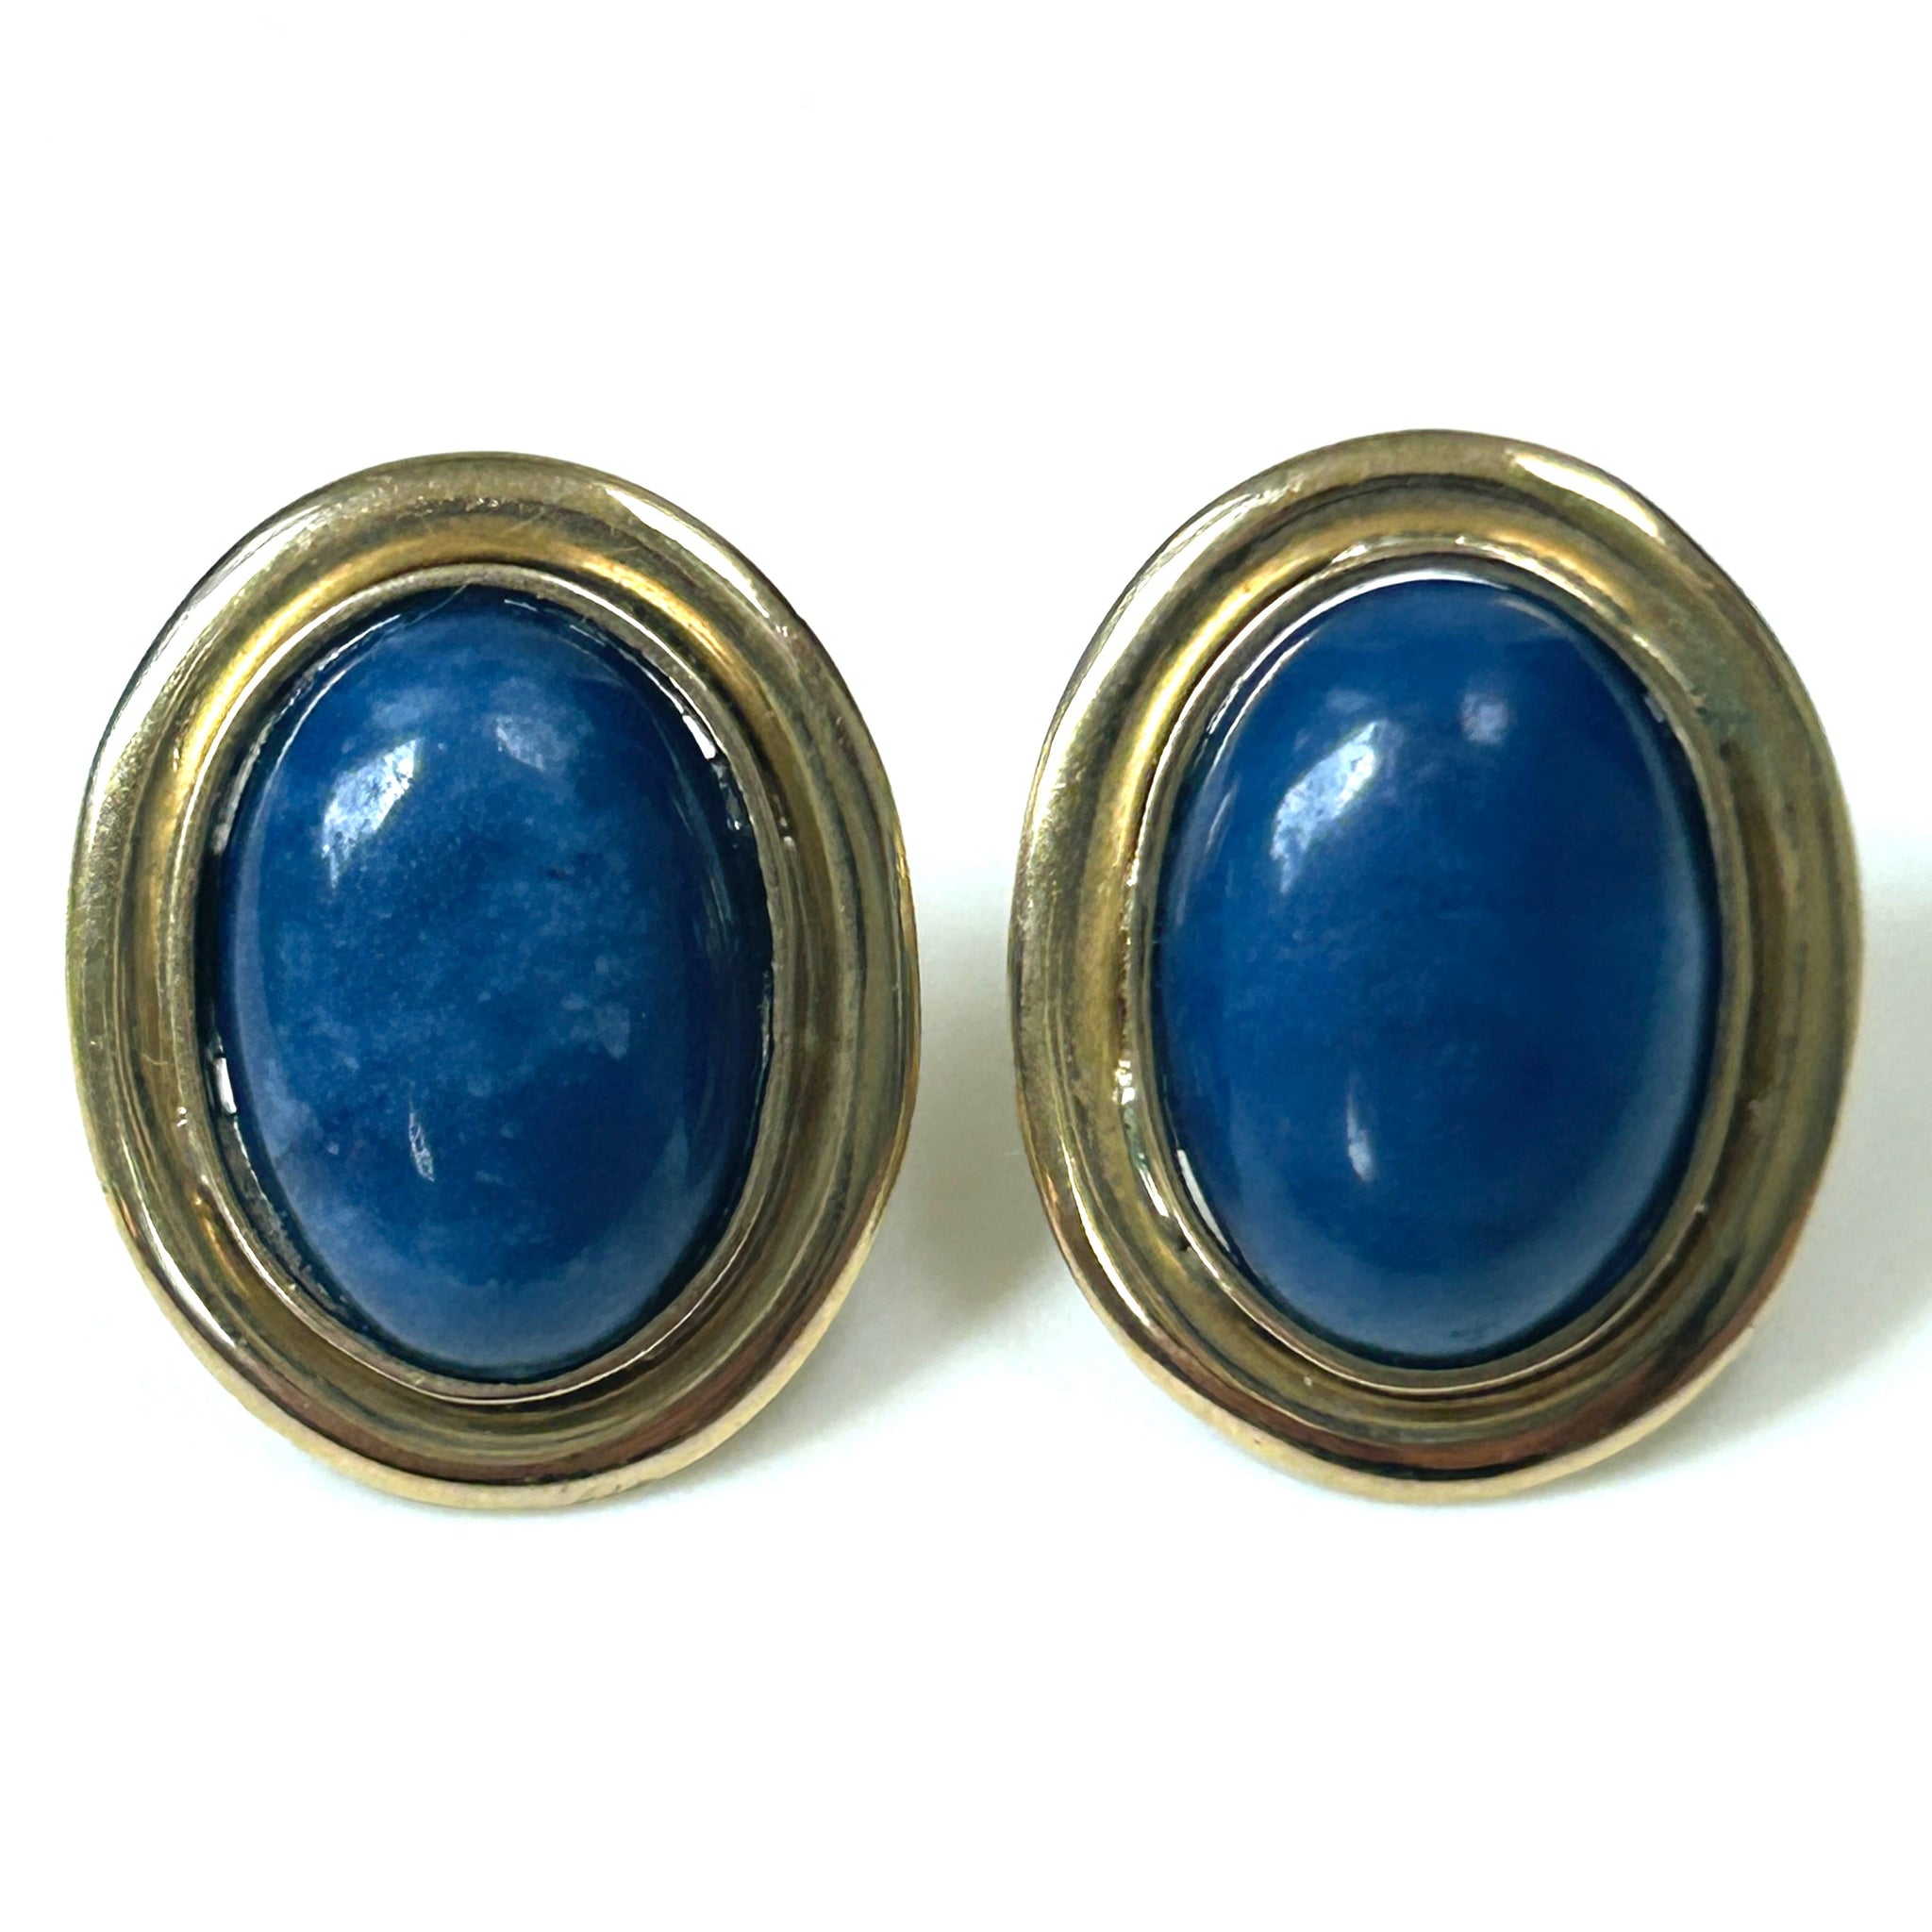 Vintage 9ct Gold and Lapis Lazuli Earrings